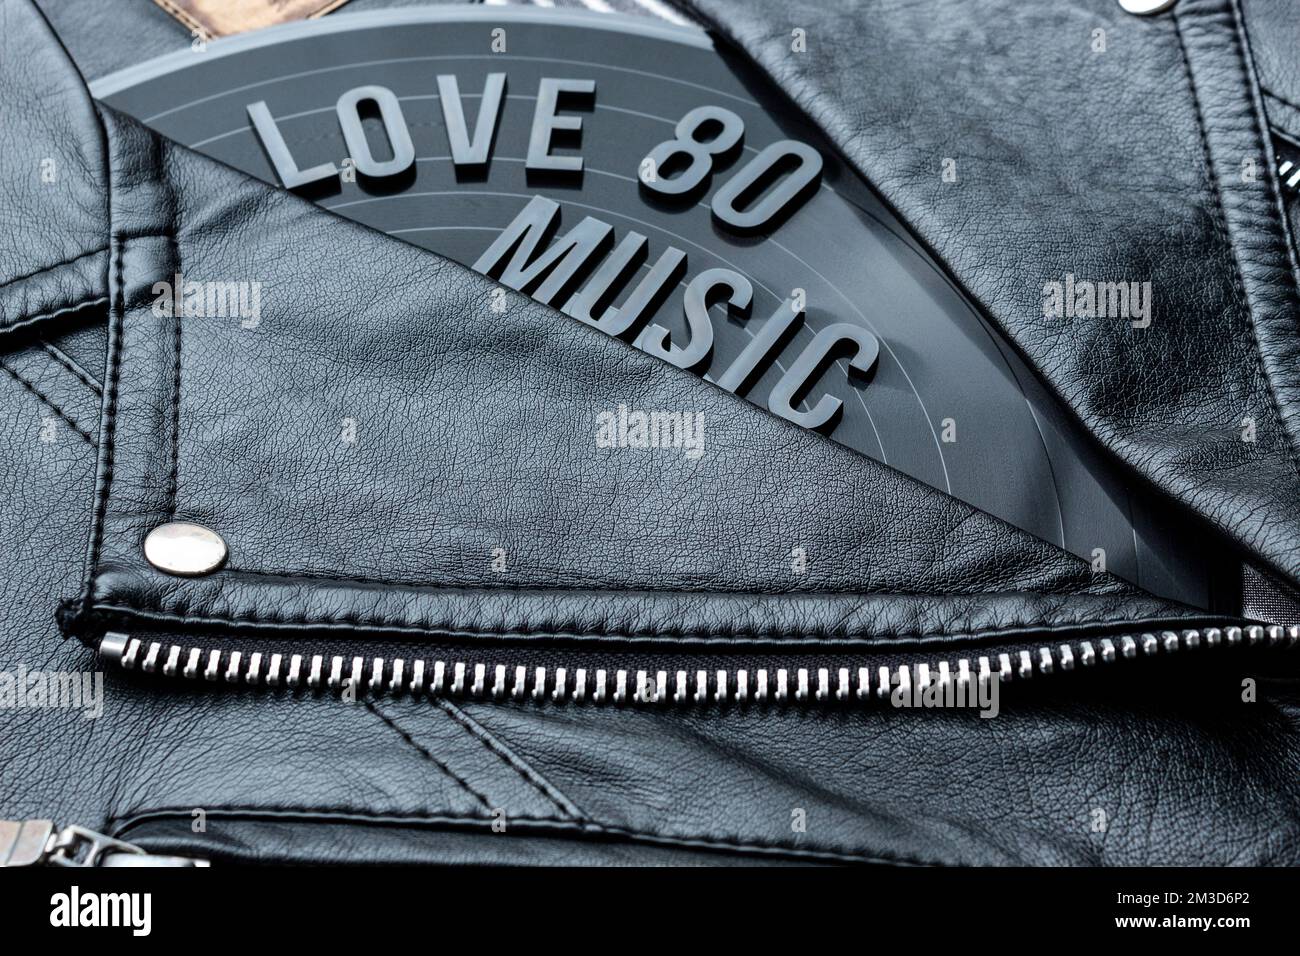 Closeup to a love 80 music lettering art over a black leather biker jacket with LP vinyl disc. Music lover concept, retro photography. Stock Photo